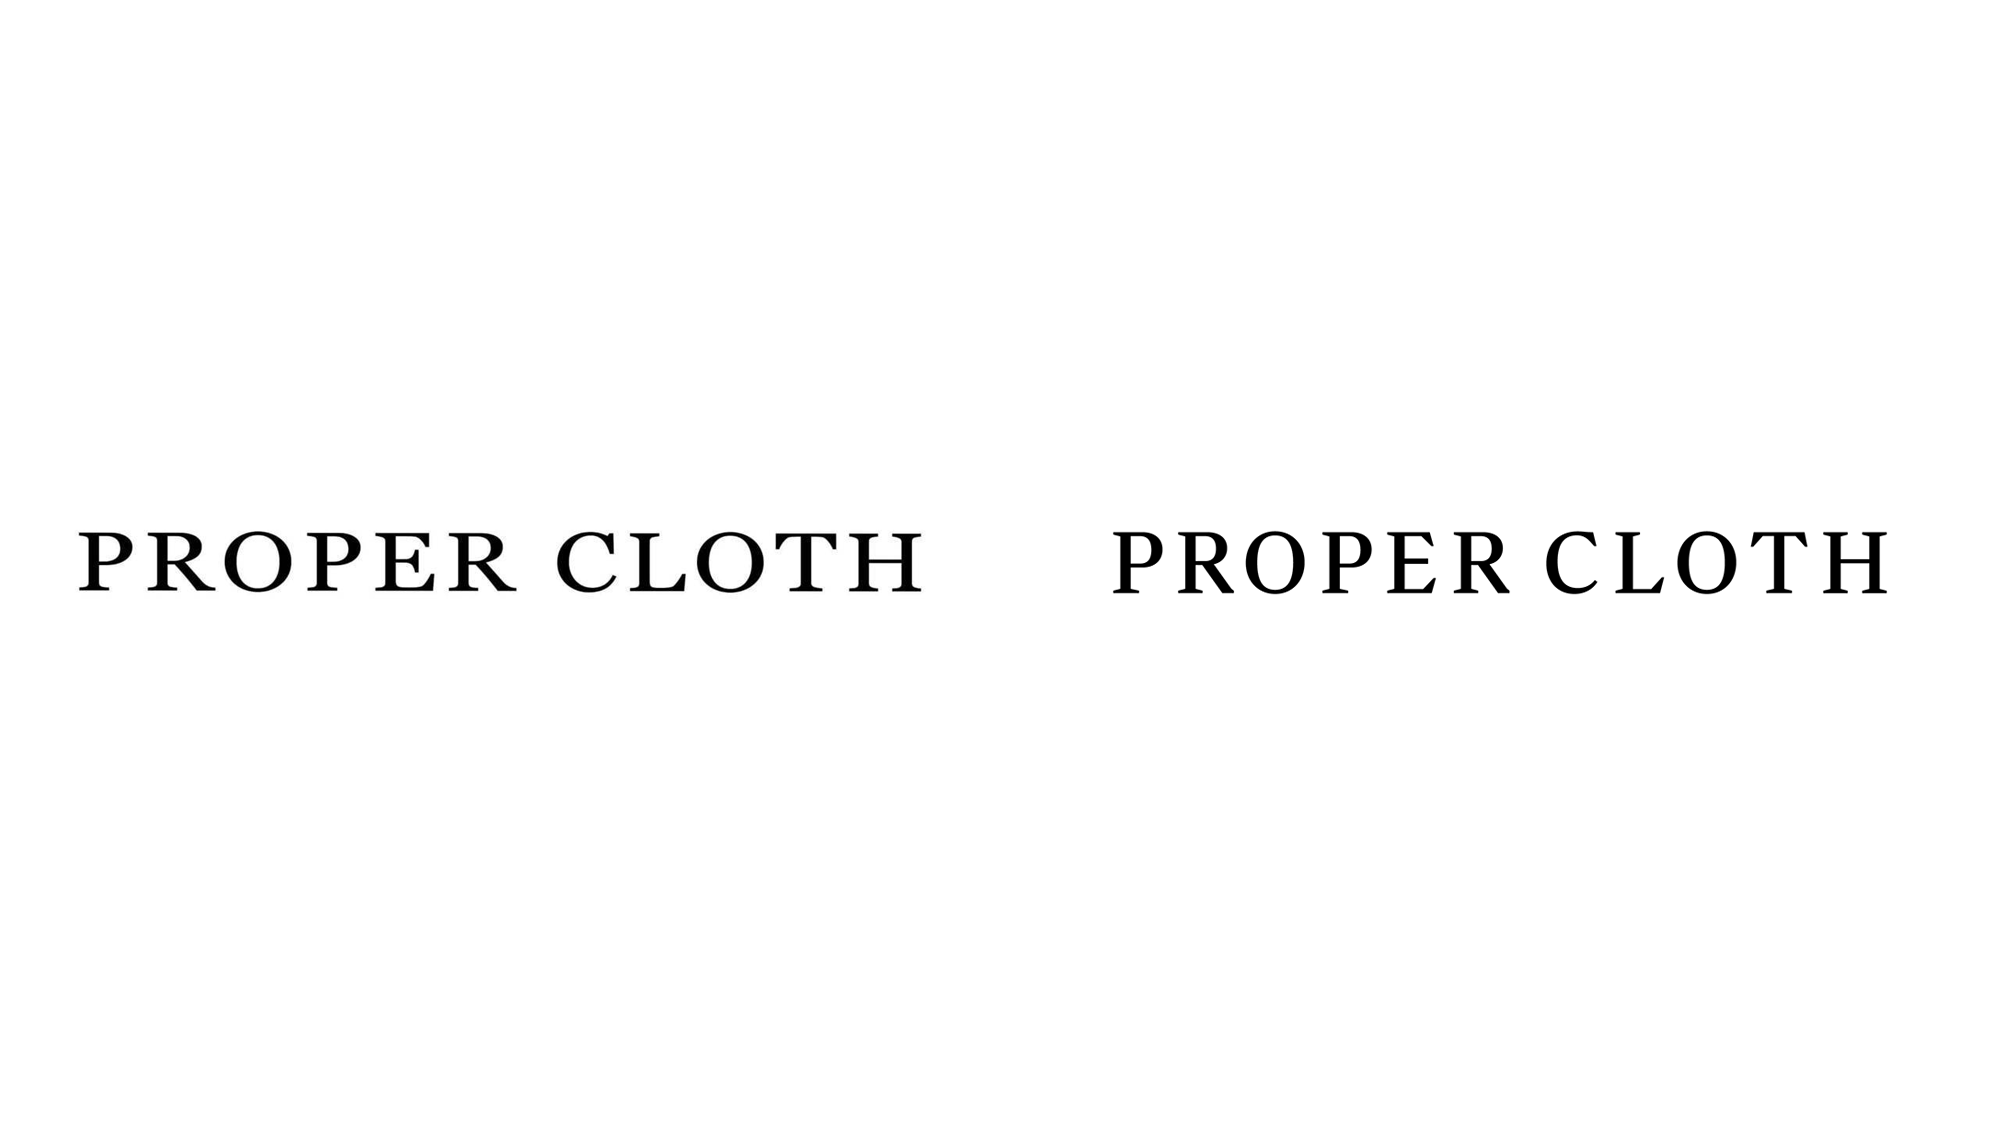 Brand New: New Logo and Identity for Proper Cloth by Mubien